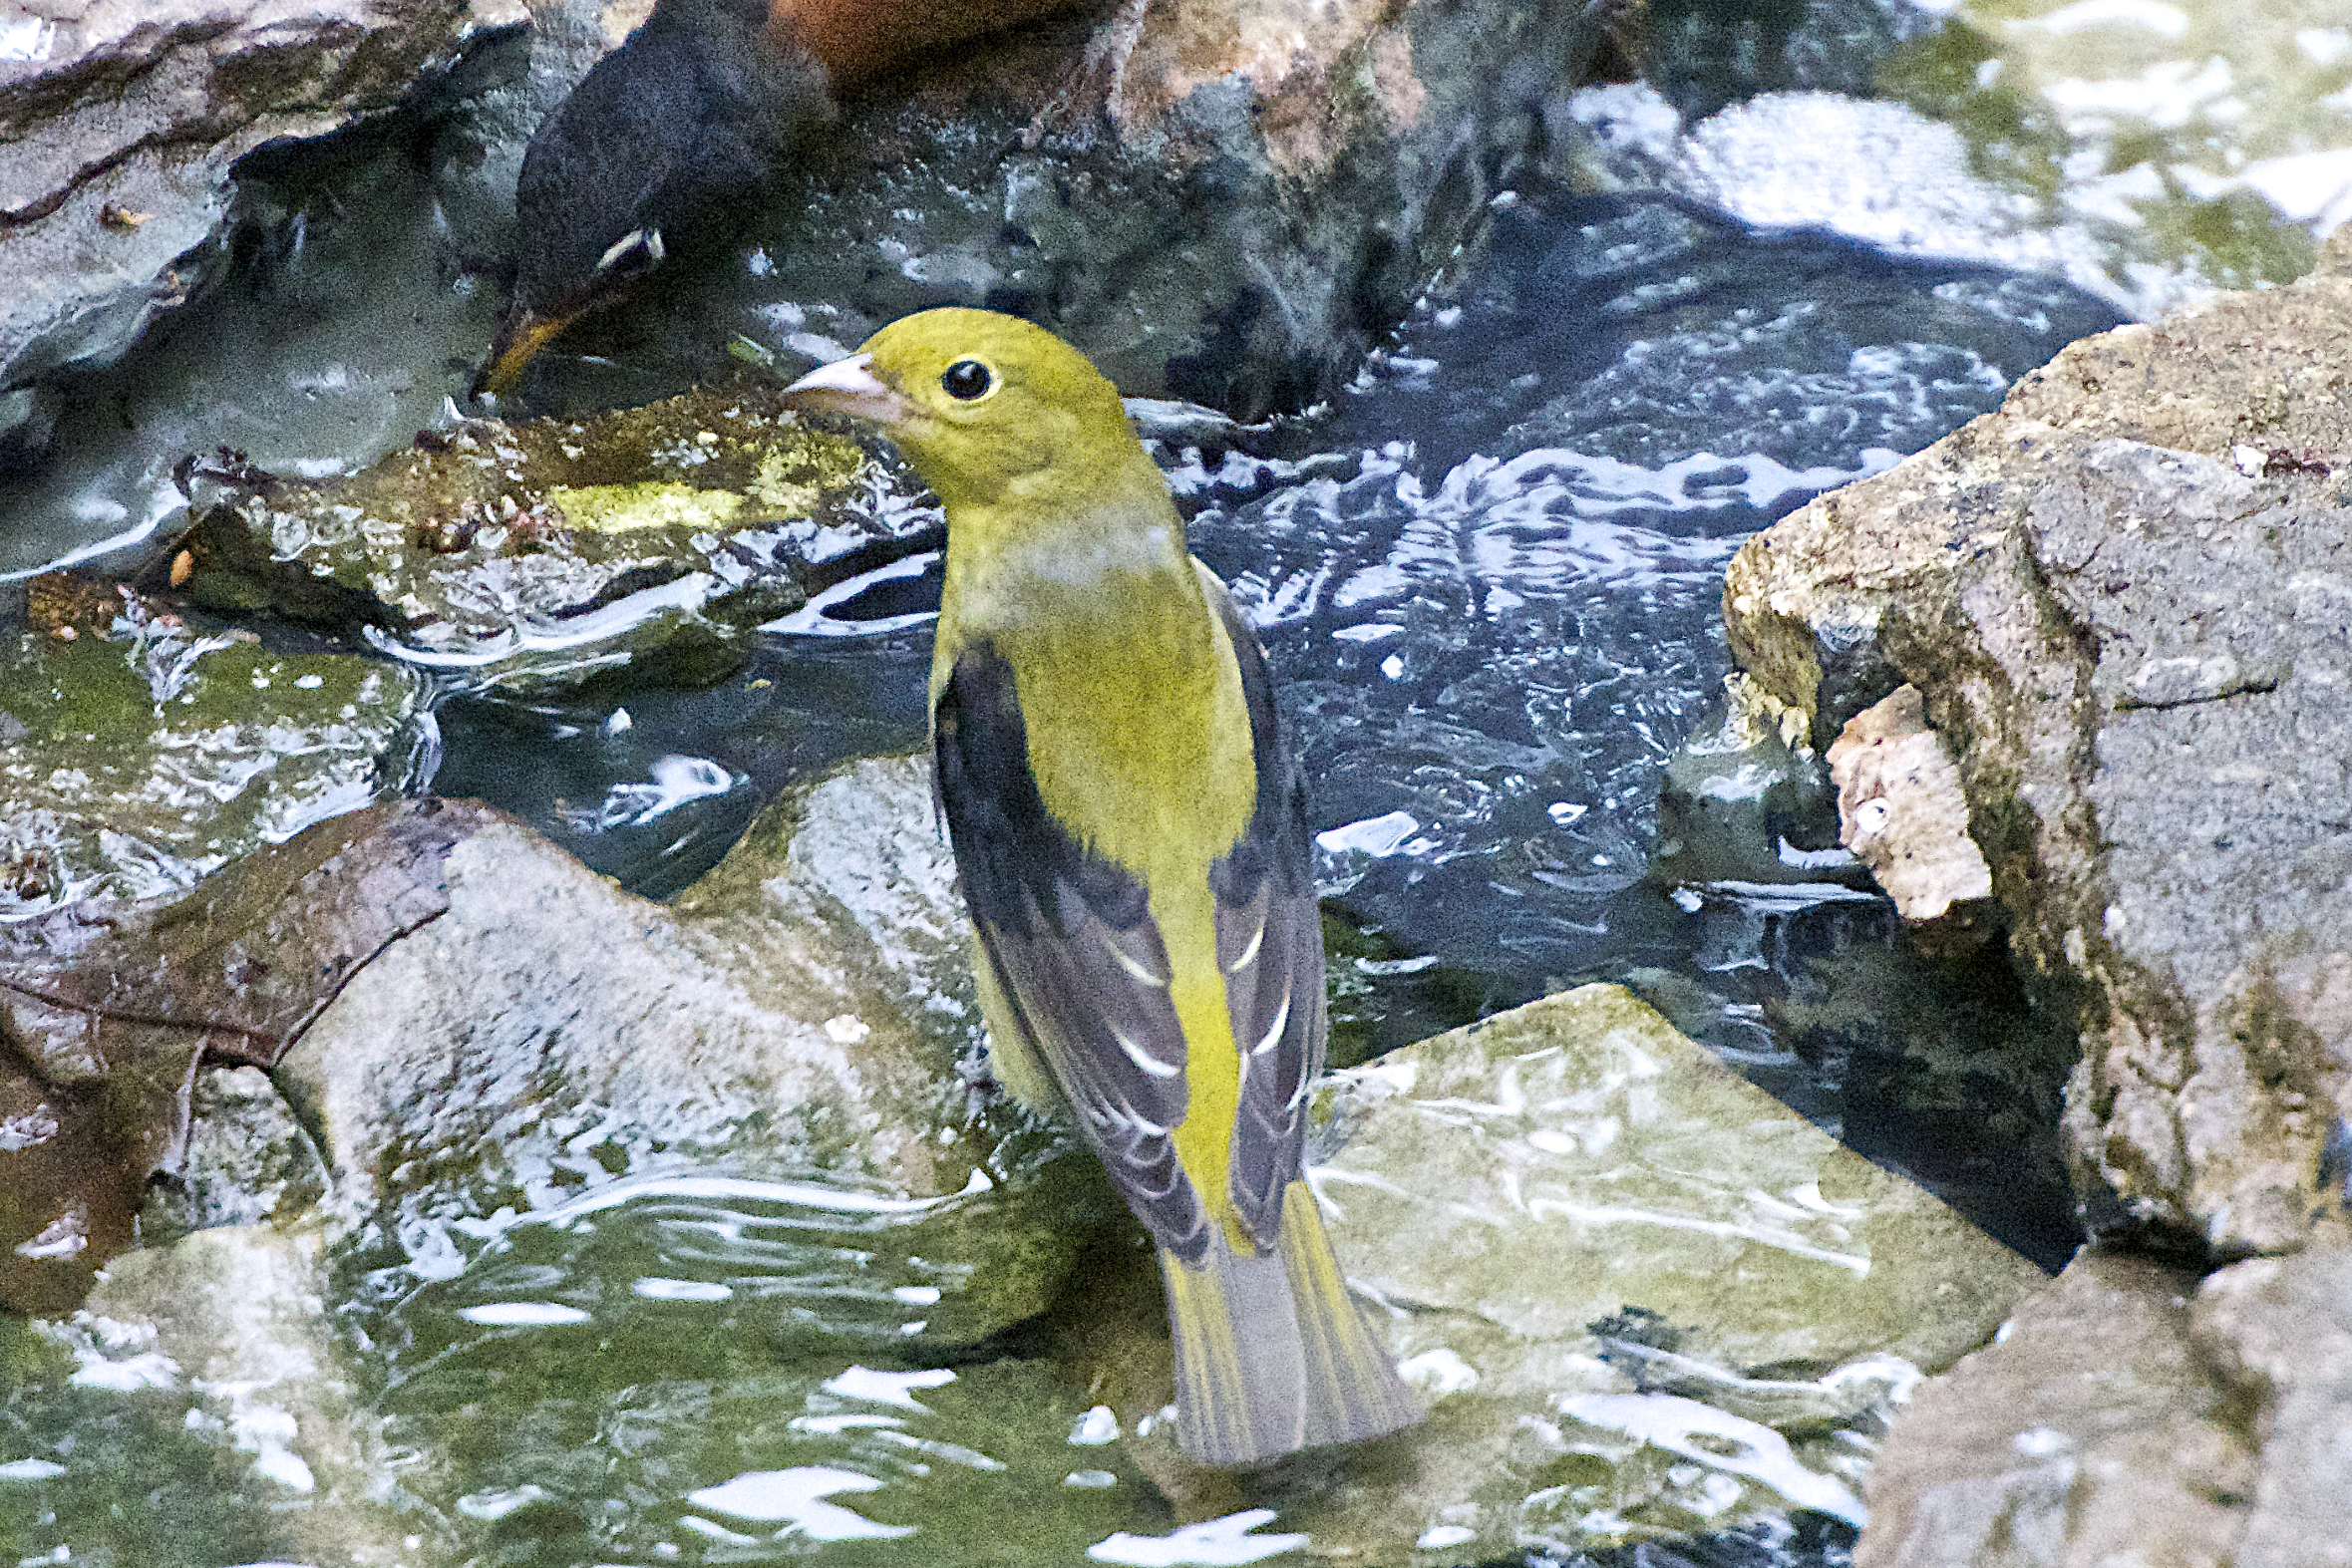 Scarlet Tanager-male after molting process. (Migration plumage)